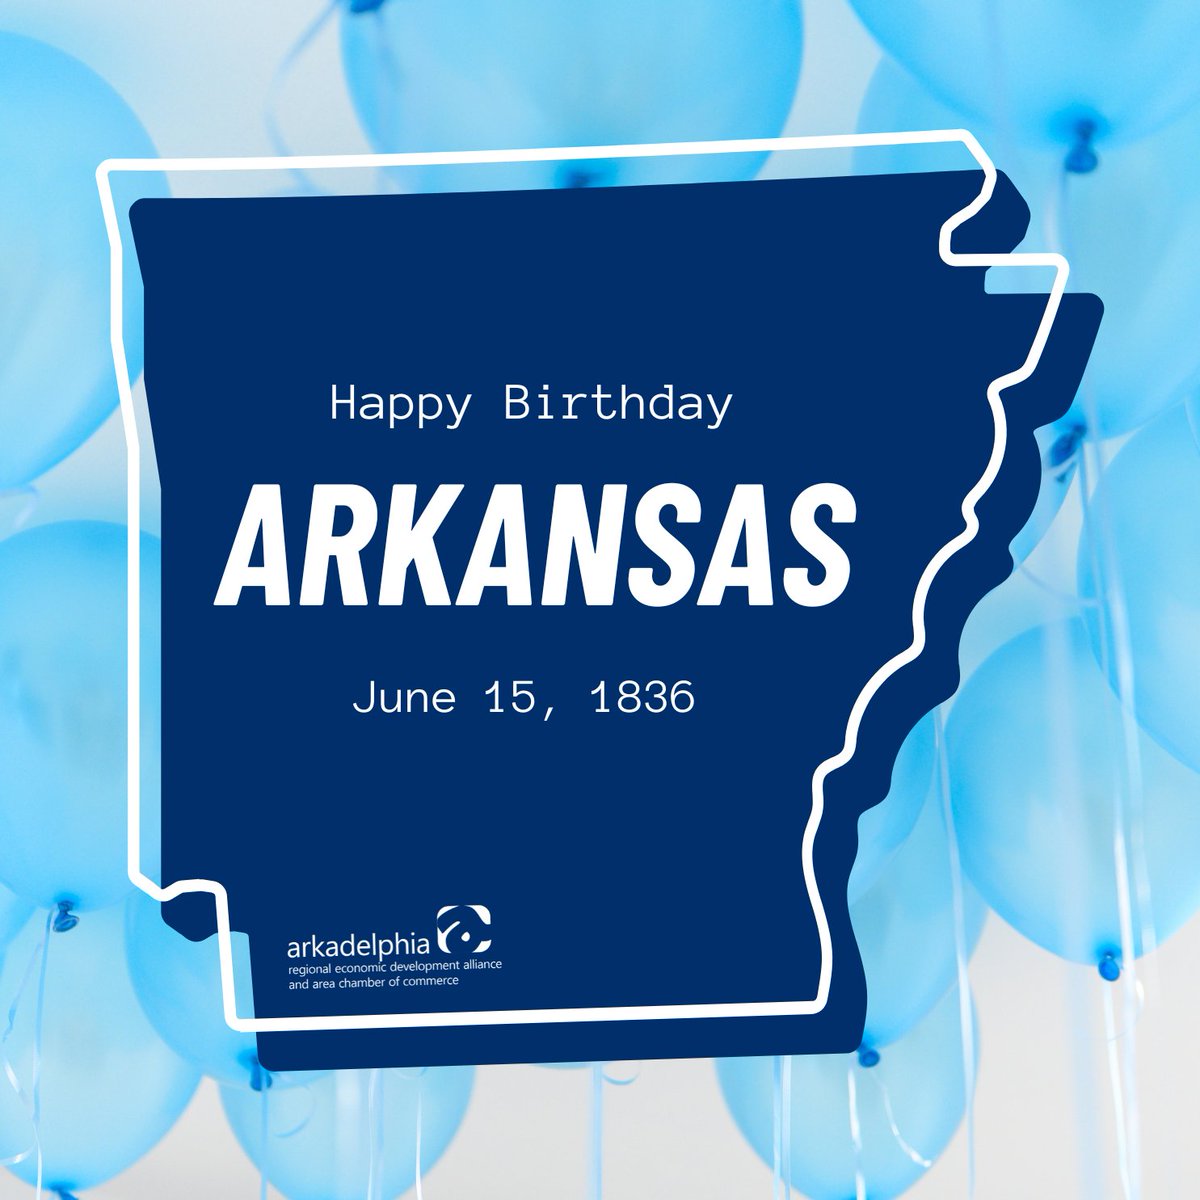 Happy birthday to our great state! 🎂 🎉 

On June 15, 1836 Arkansas was officialy admitted to the Union making it the 25th state of the United States of America. 

#Arkansas #ClarkCounty